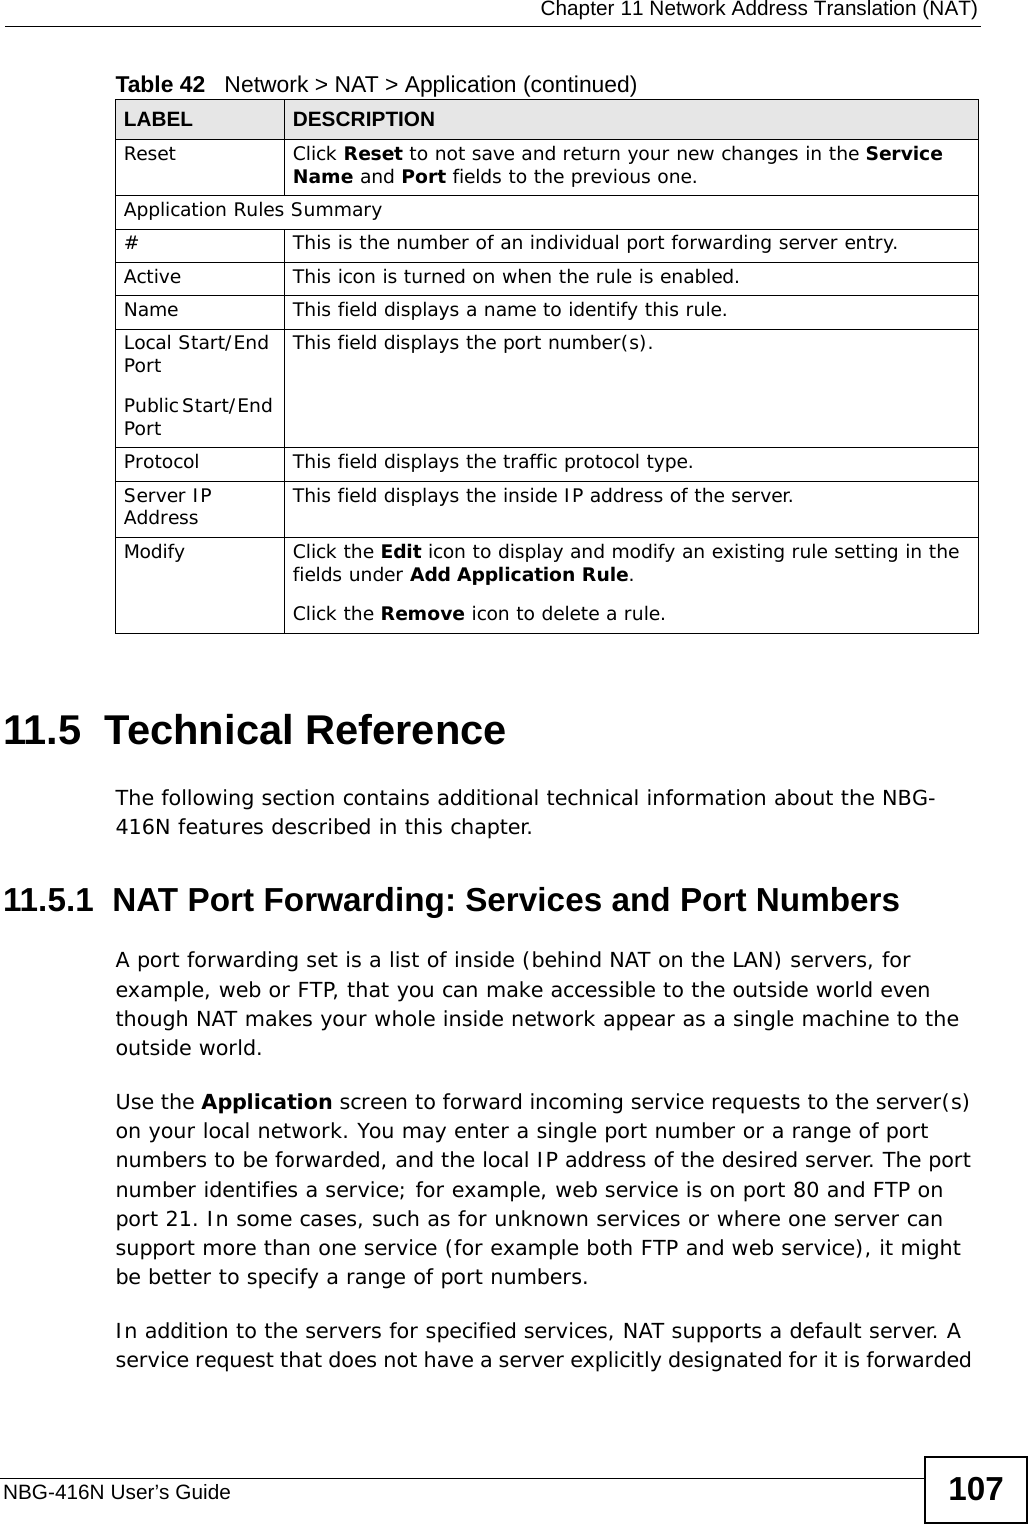  Chapter 11 Network Address Translation (NAT)NBG-416N User’s Guide 10711.5  Technical ReferenceThe following section contains additional technical information about the NBG-416N features described in this chapter.11.5.1  NAT Port Forwarding: Services and Port NumbersA port forwarding set is a list of inside (behind NAT on the LAN) servers, for example, web or FTP, that you can make accessible to the outside world even though NAT makes your whole inside network appear as a single machine to the outside world. Use the Application screen to forward incoming service requests to the server(s) on your local network. You may enter a single port number or a range of port numbers to be forwarded, and the local IP address of the desired server. The port number identifies a service; for example, web service is on port 80 and FTP on port 21. In some cases, such as for unknown services or where one server can support more than one service (for example both FTP and web service), it might be better to specify a range of port numbers.In addition to the servers for specified services, NAT supports a default server. A service request that does not have a server explicitly designated for it is forwarded Reset Click Reset to not save and return your new changes in the Service Name and Port fields to the previous one.Application Rules Summary#This is the number of an individual port forwarding server entry.Active This icon is turned on when the rule is enabled. Name This field displays a name to identify this rule.Local Start/End PortPublic Start/End PortThis field displays the port number(s). Protocol This field displays the traffic protocol type. Server IP Address This field displays the inside IP address of the server.Modify Click the Edit icon to display and modify an existing rule setting in the fields under Add Application Rule. Click the Remove icon to delete a rule.Table 42   Network &gt; NAT &gt; Application (continued)LABEL DESCRIPTION